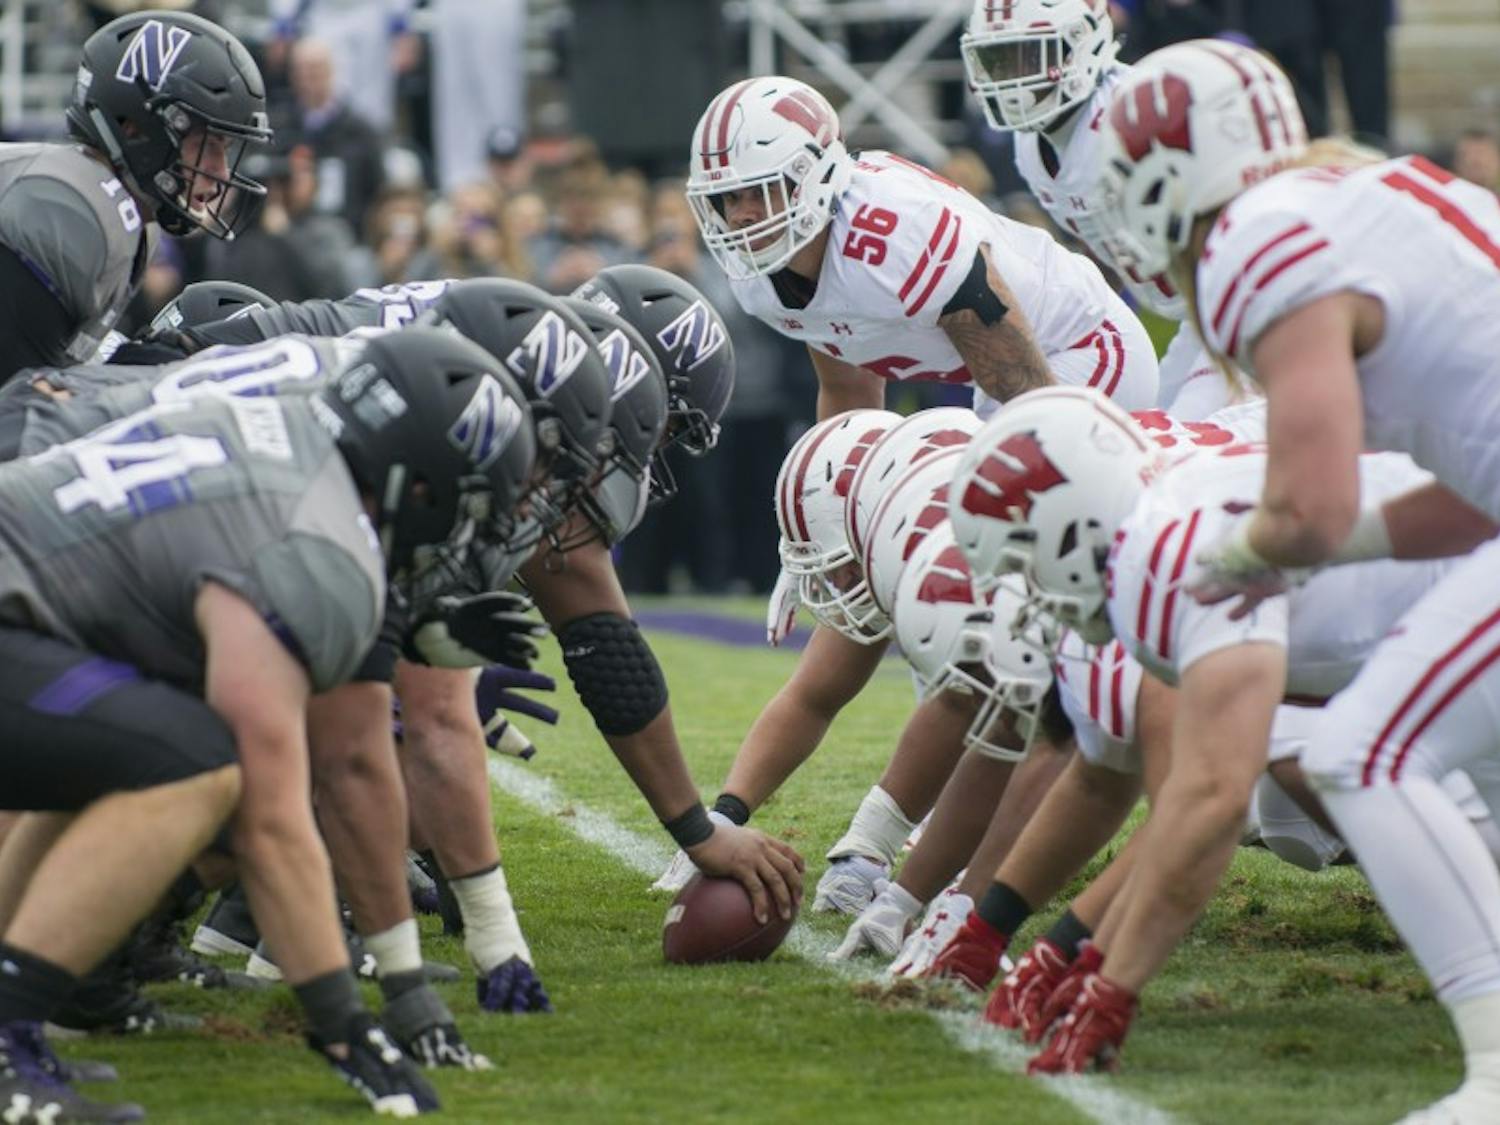 Big Ten football players are concerned about the proximity and contact of their sport and its relationship to spread of COVID-19.